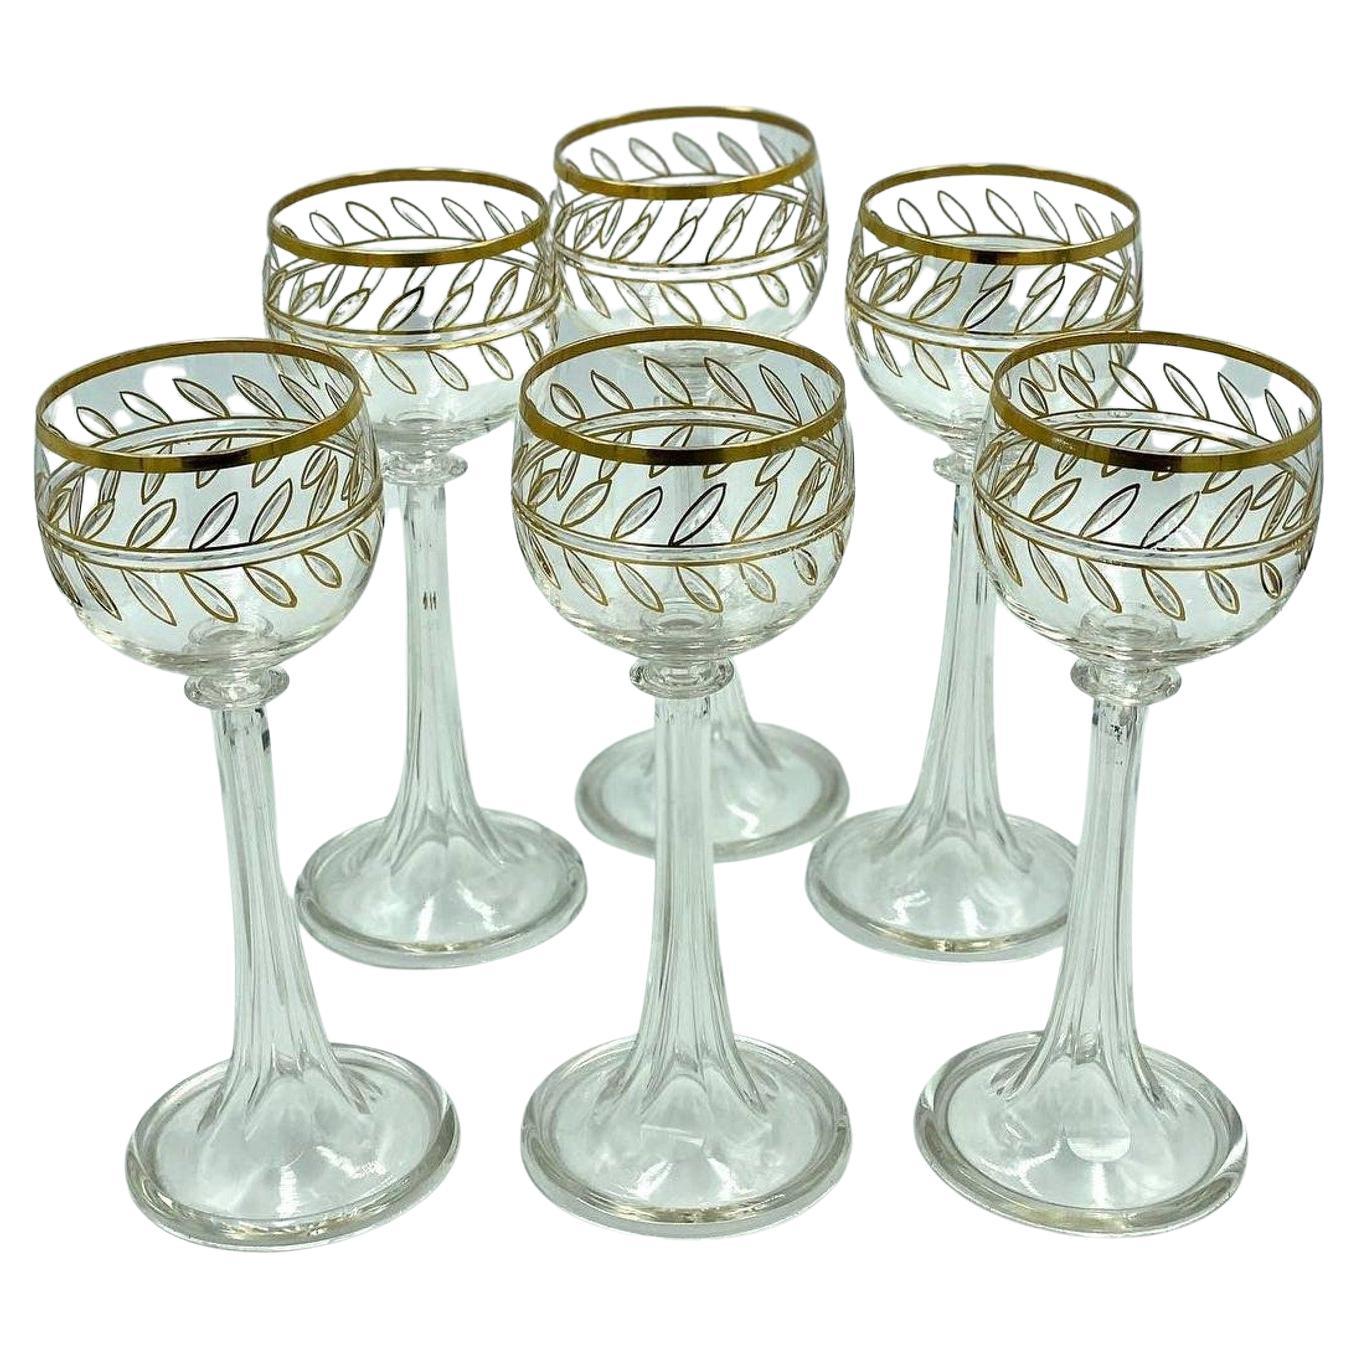 https://a.1stdibscdn.com/antique-crystal-glasses-with-24k-gold-amazing-rare-set-of-crystal-glasses-for-sale/f_60962/f_321242621673262422499/f_32124262_1673262422939_bg_processed.jpg